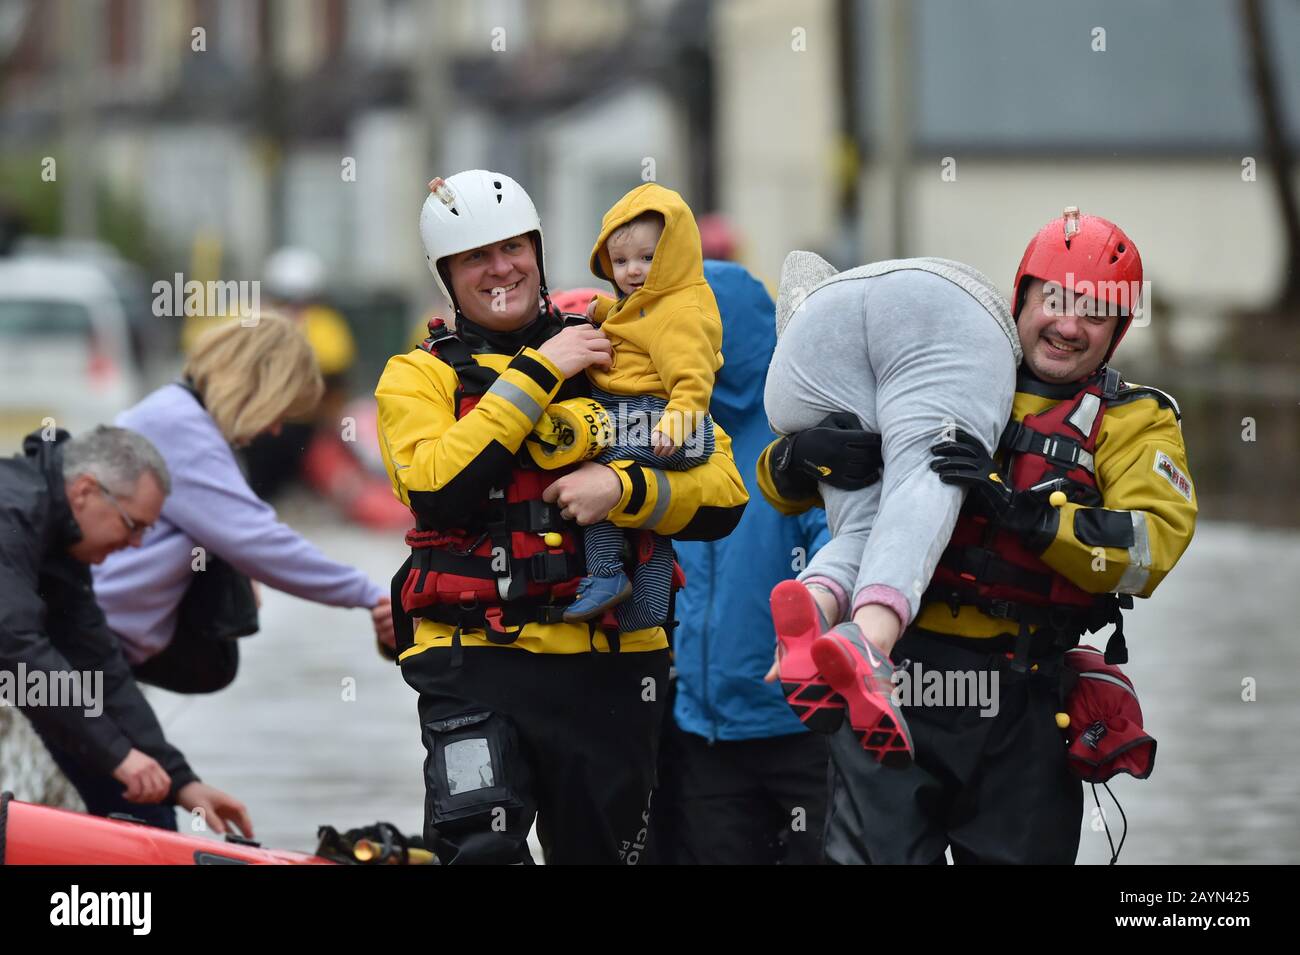 One-year-old Blake is handed to his mum, Terri O'Donnel, by a rescue worker as emergency services continue to take families to safety, after flooding in Nantgarw, Wales, as Storm Dennis hit the UK. Stock Photo